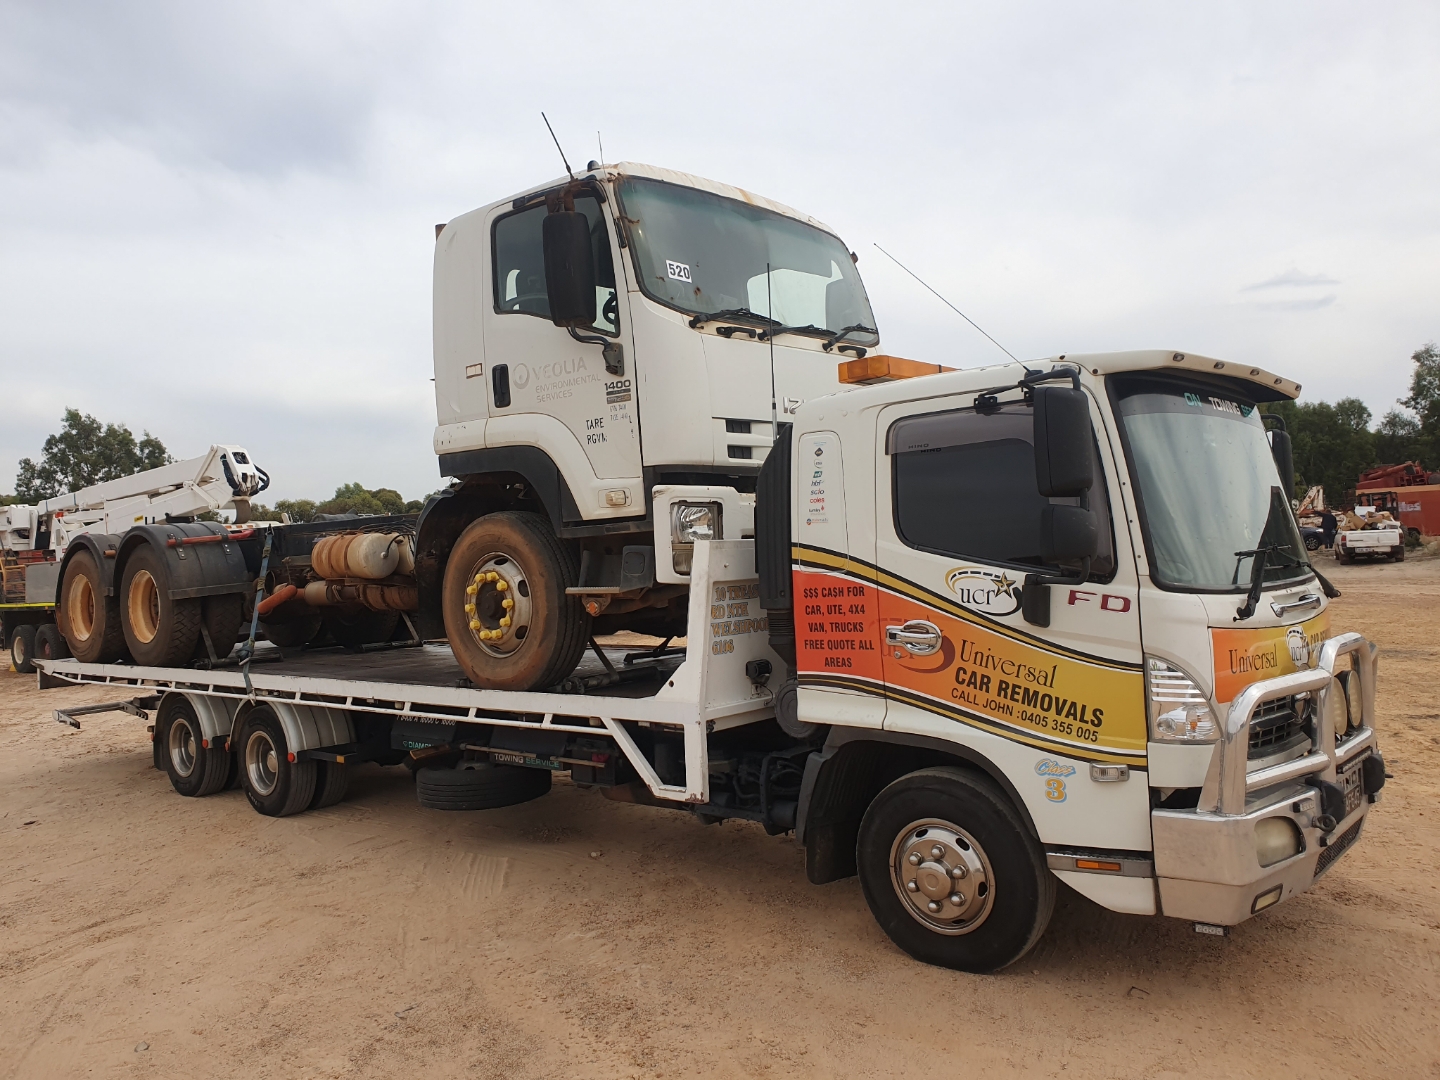 Tow truck towing truck Perth Towing and Tow Truck Services